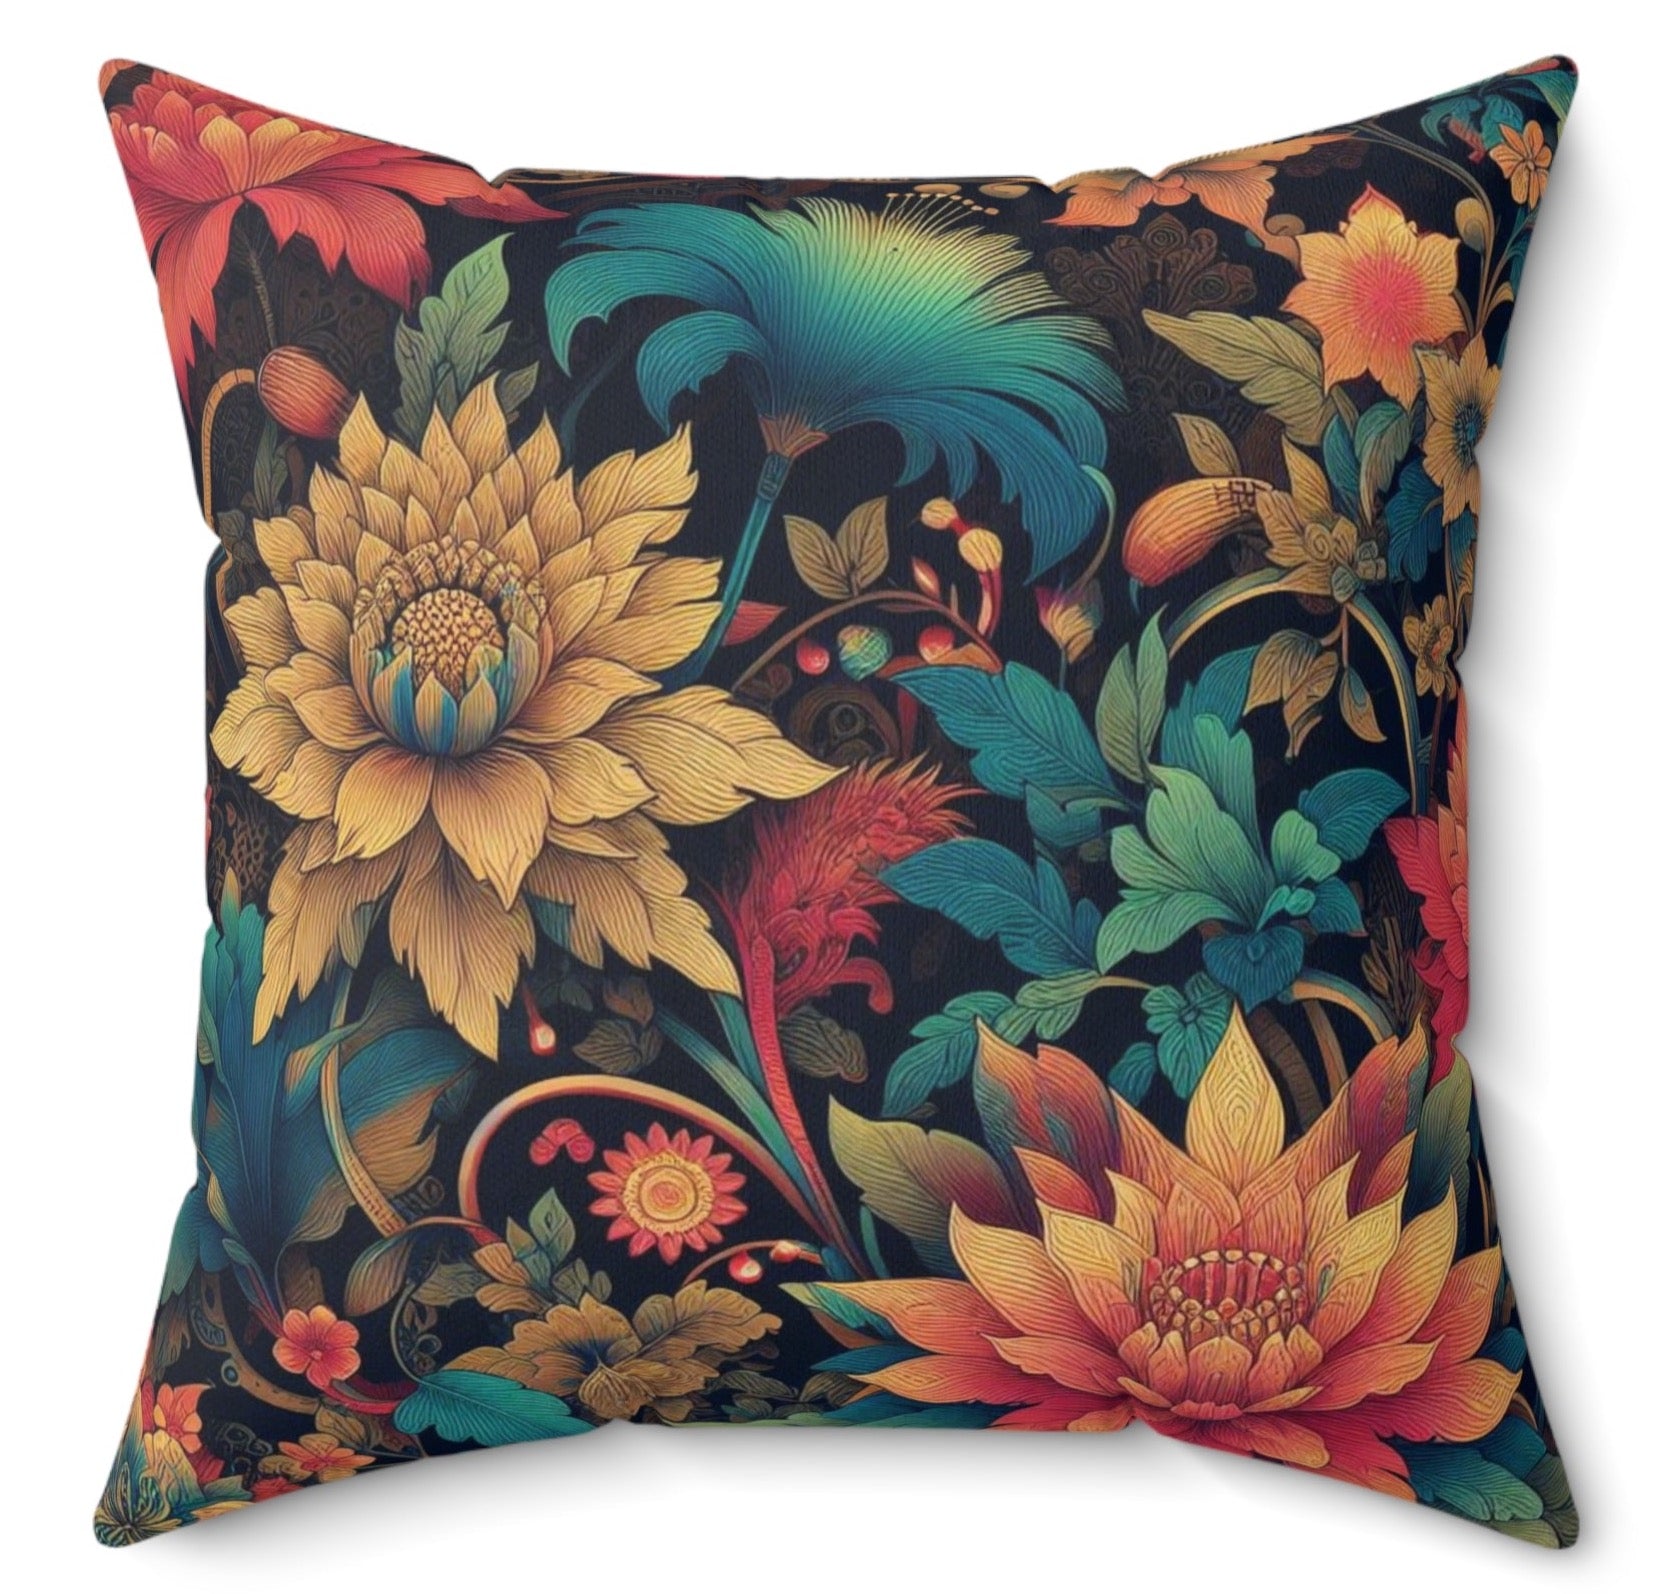 Maximalist Boho Oriental Vintage Floral Cushion Decorative Throw Pillow Polyester Square Cover